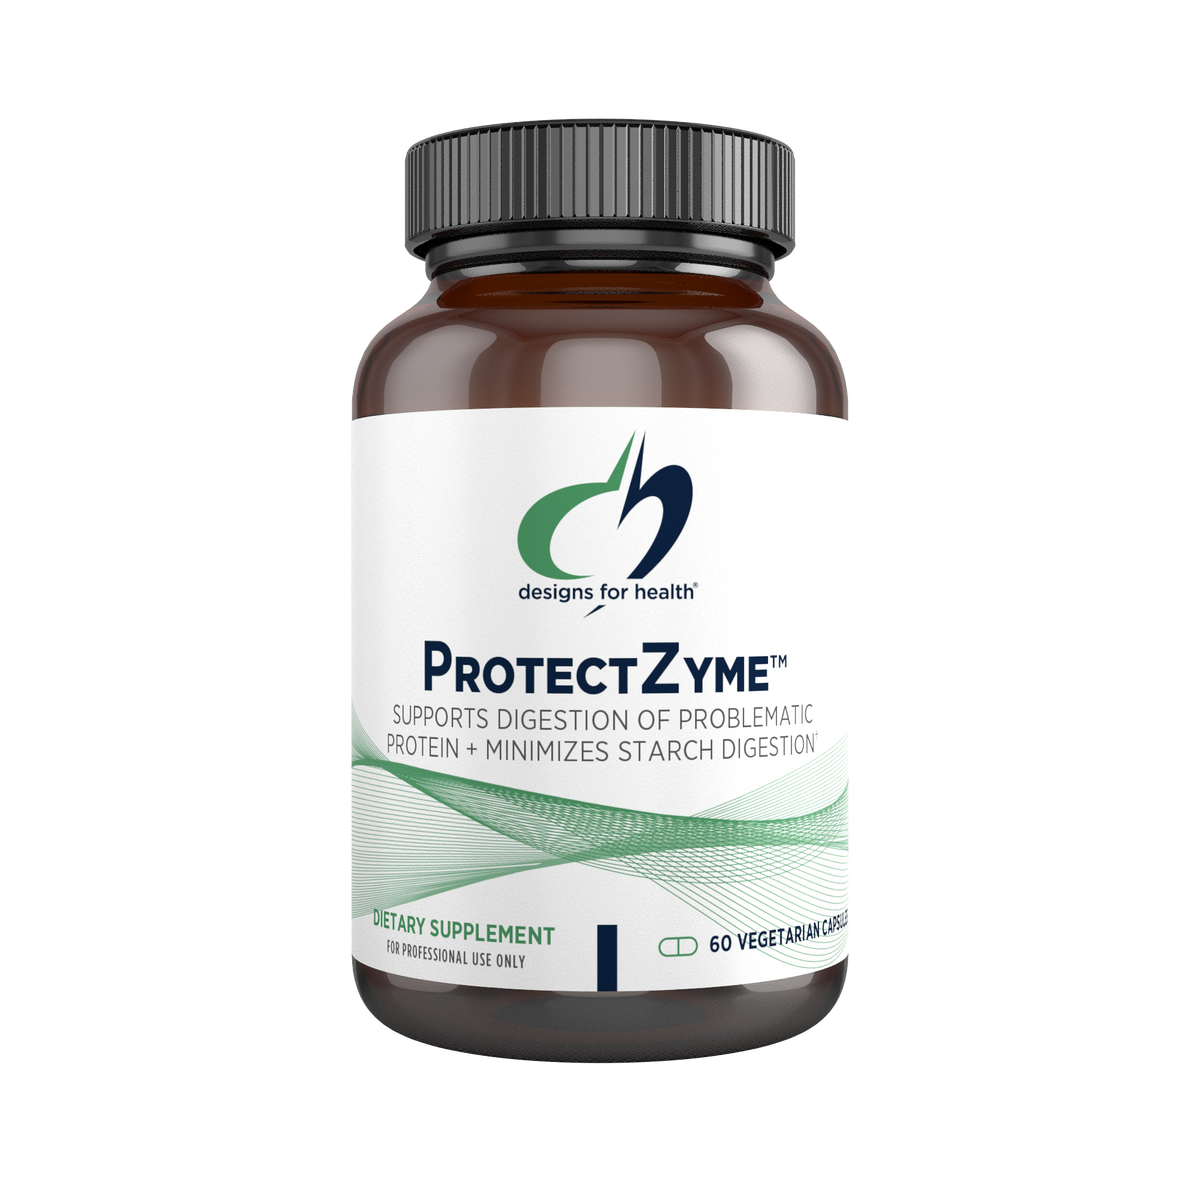 ProtectZyme™